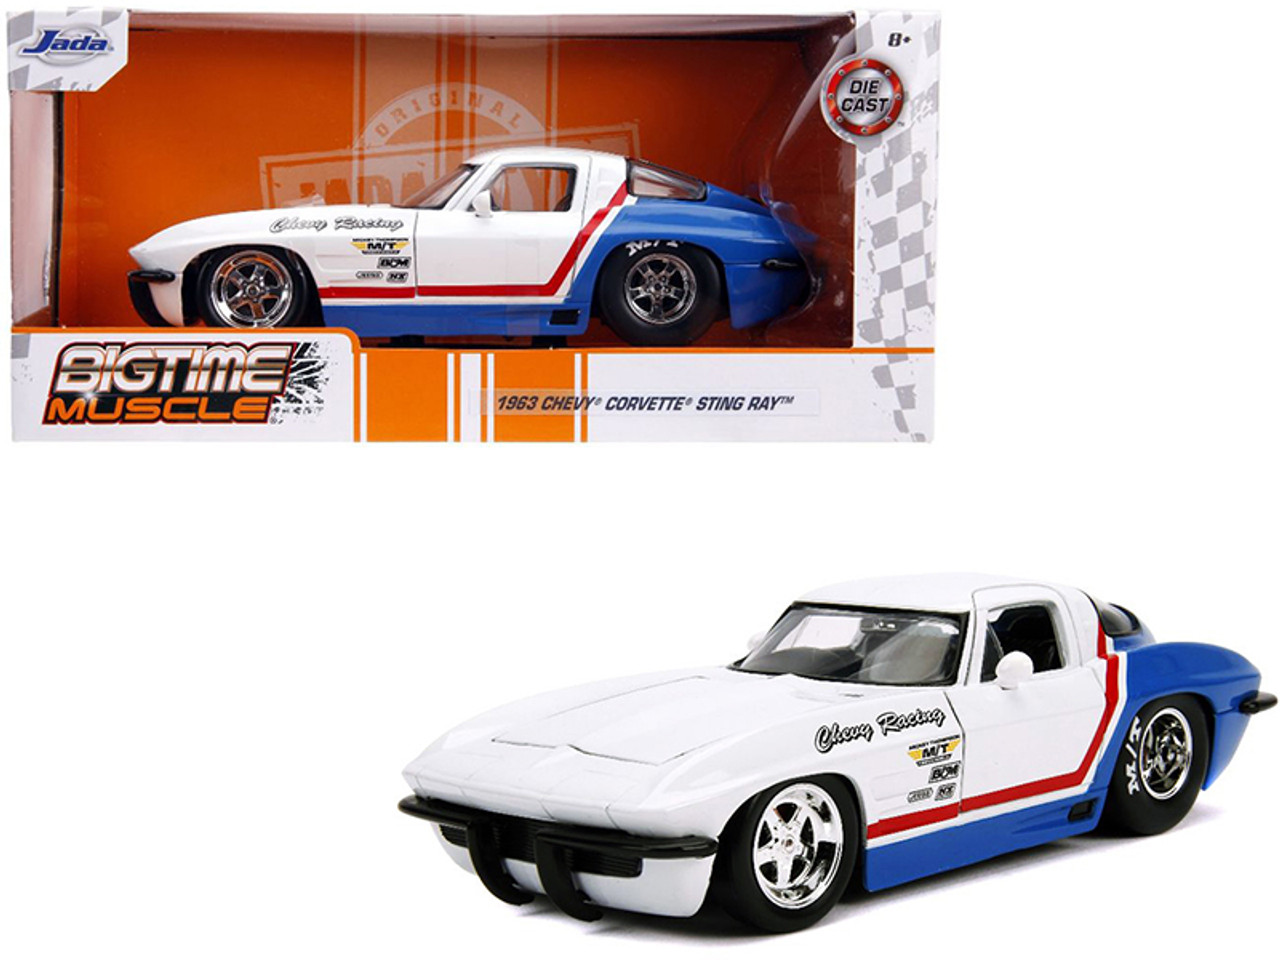 1963 Chevrolet Corvette Stingray White and Blue with Red Stripe "Chevy Racing" "Bigtime Muscle" 1/24 Diecast Model Car by Jada